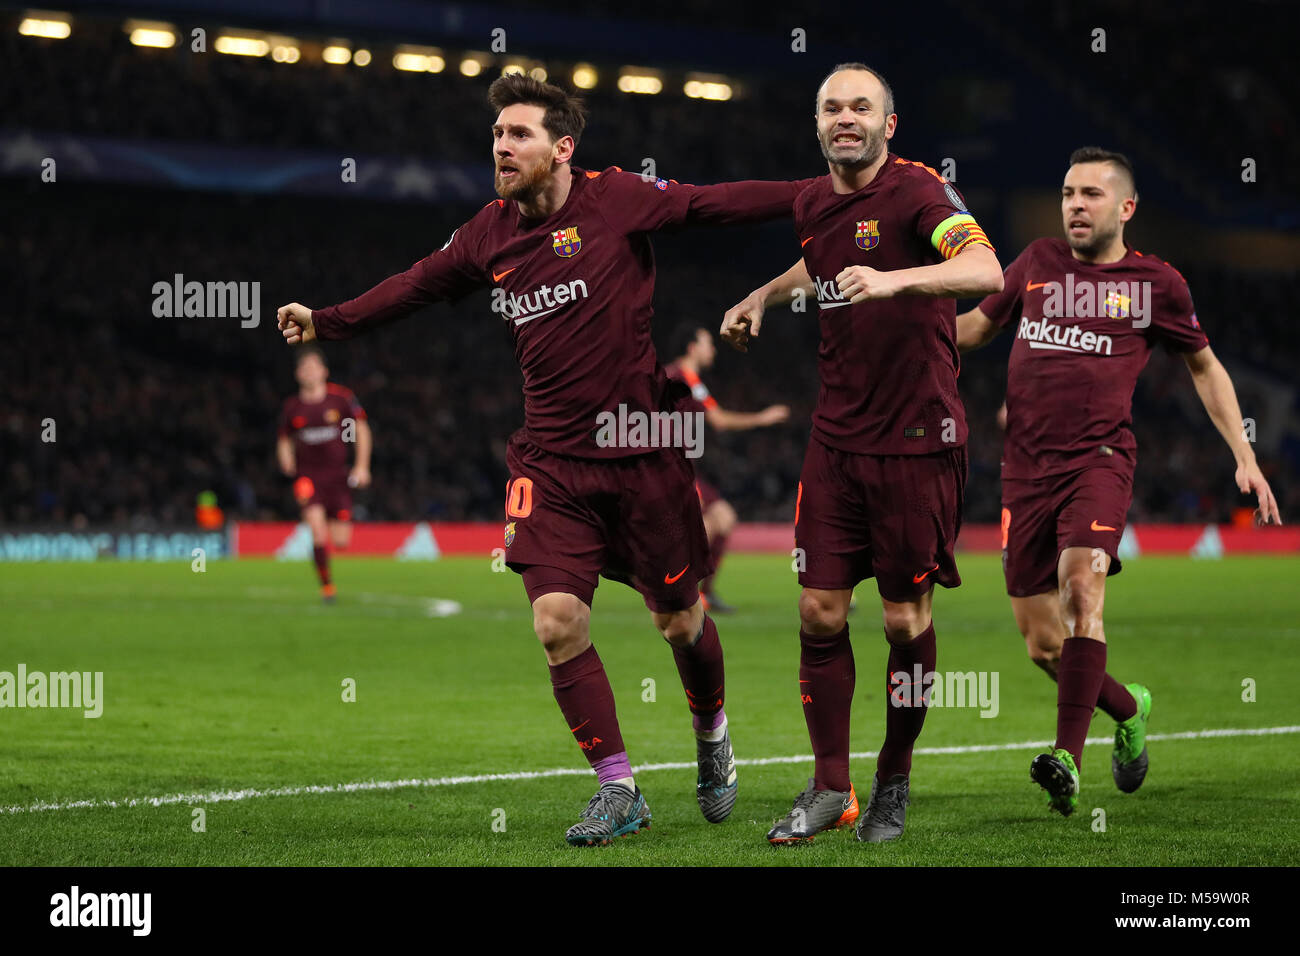 London, UK. 20th February, 2018. Lionel Messi (left) of Barcelona celebrates with Andres Iniesta (centre) and Jordi Alba (right) after scoring the equalising goal, making it 1-1- Chelsea v Barcelona, UEFA Champions League, Round of 16, 1st Leg, Stamford Bridge, London - 20th February 2018. Credit: Richard Calver/Alamy Live News Stock Photo